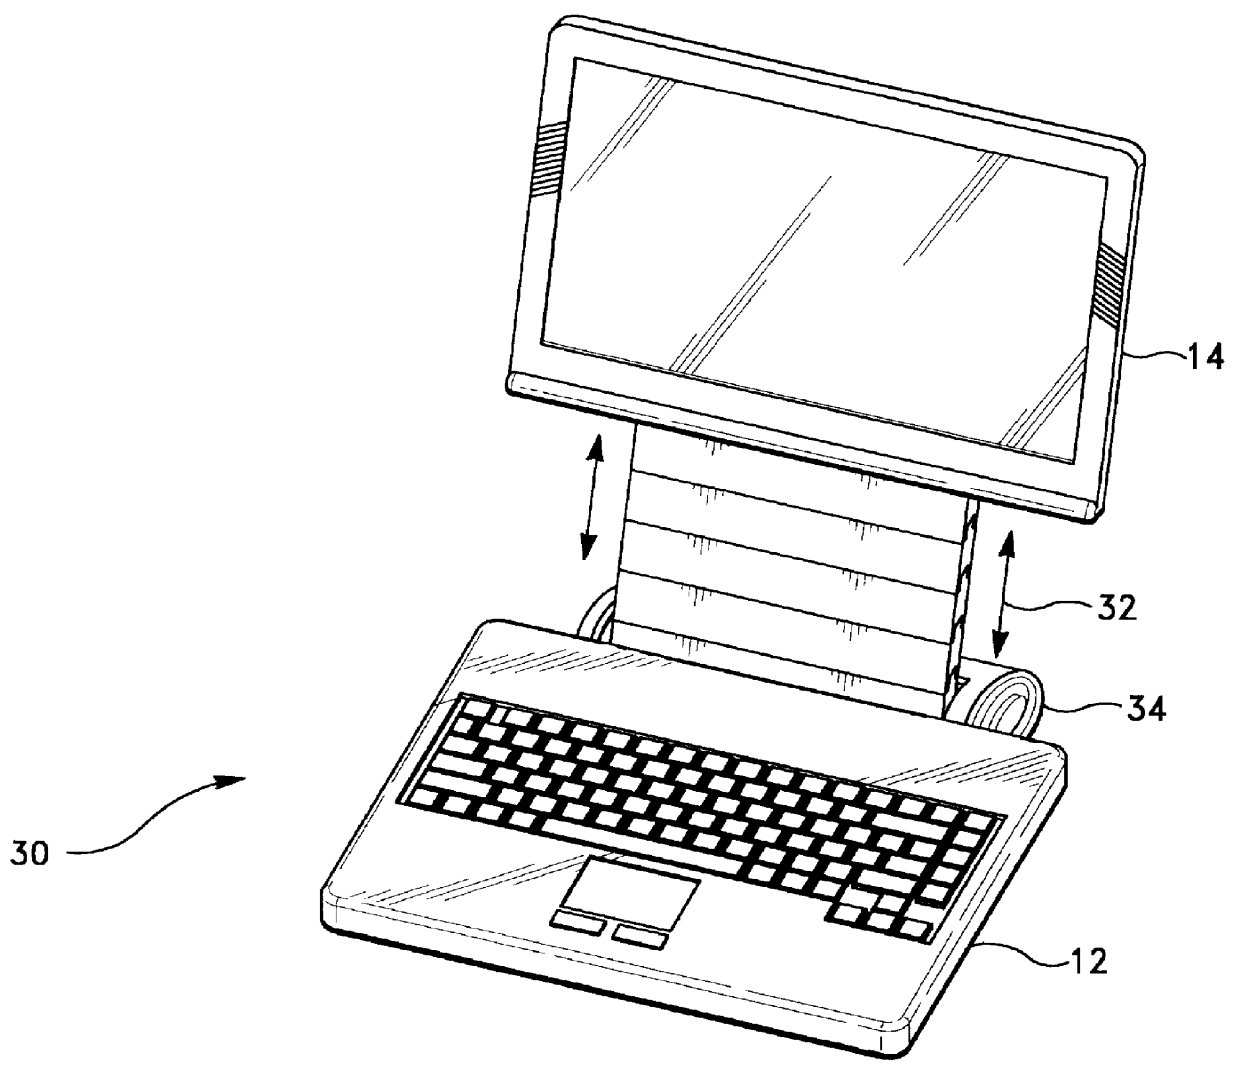 Flat panel display with adjustable height for a portable computer